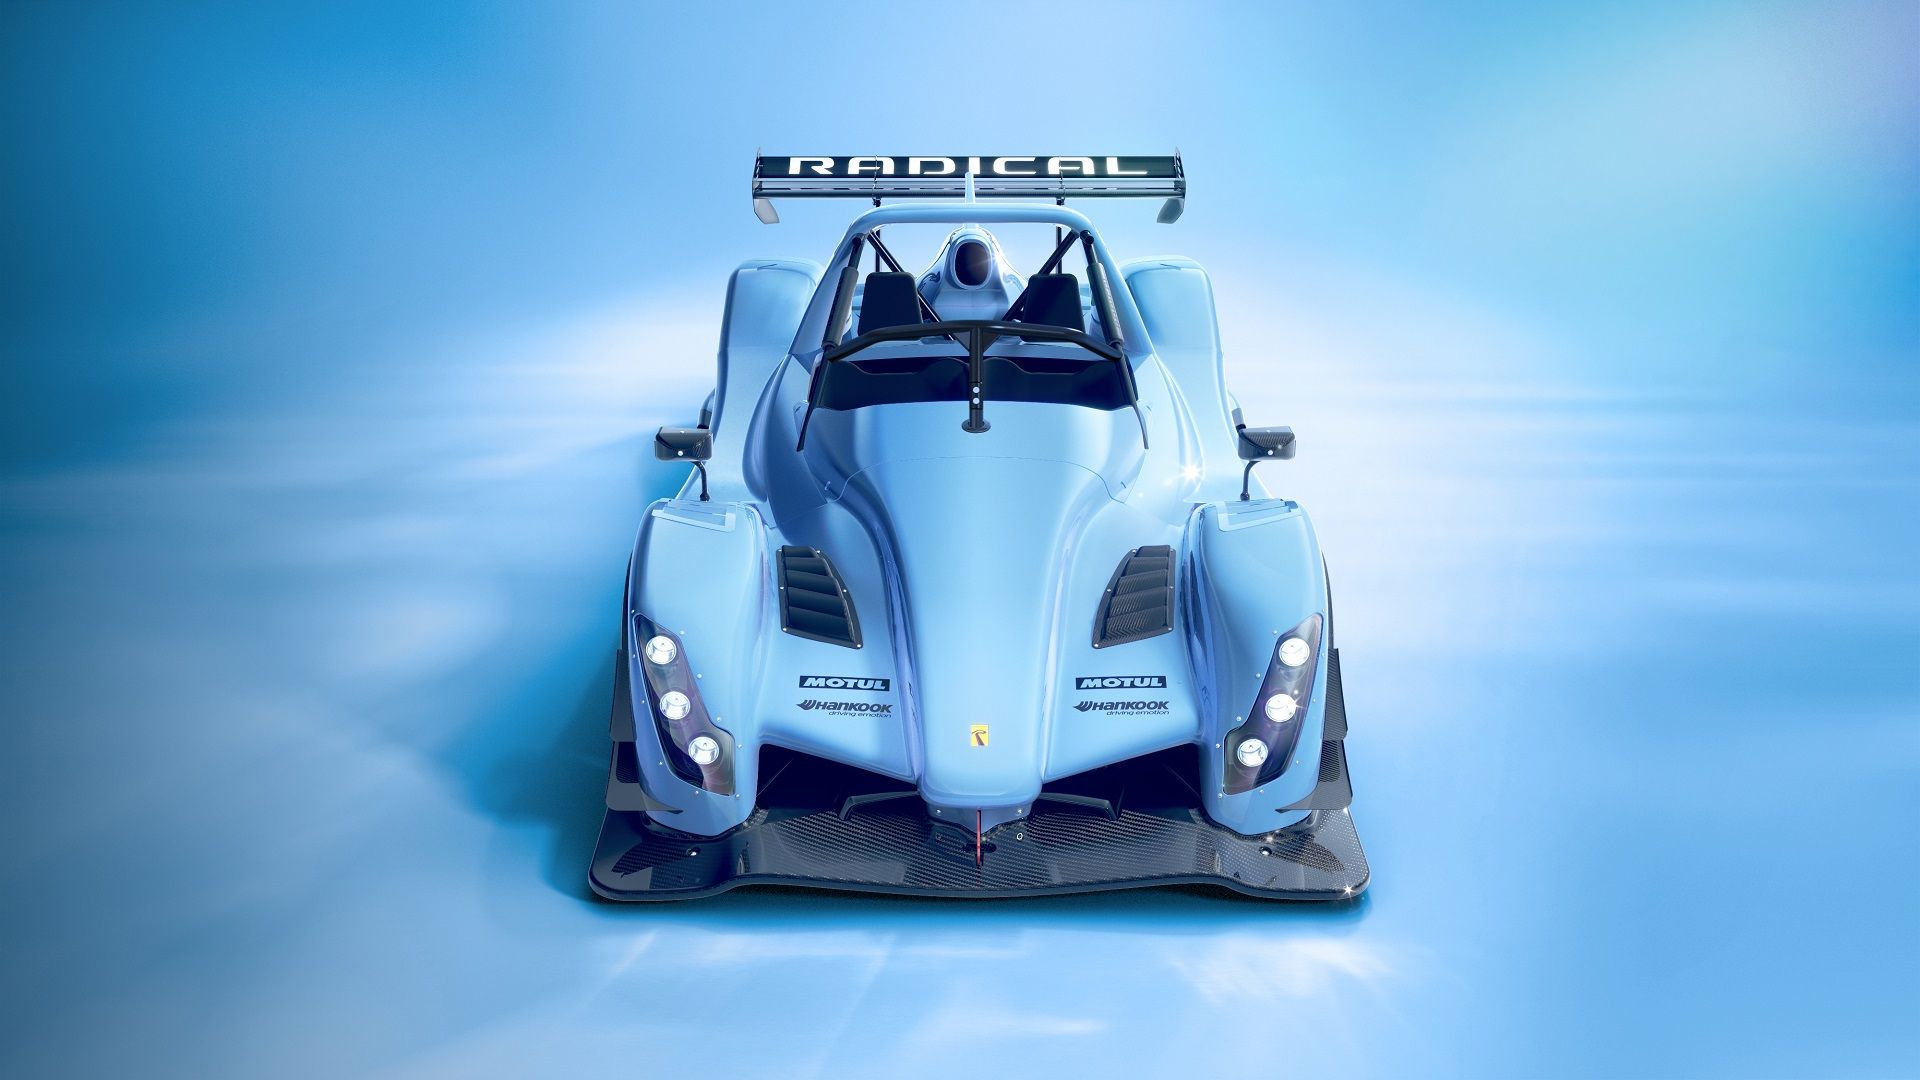 Radical Motorsport introduces the SR10 XXR: improving on the winning SR10 formula, upgraded for the future